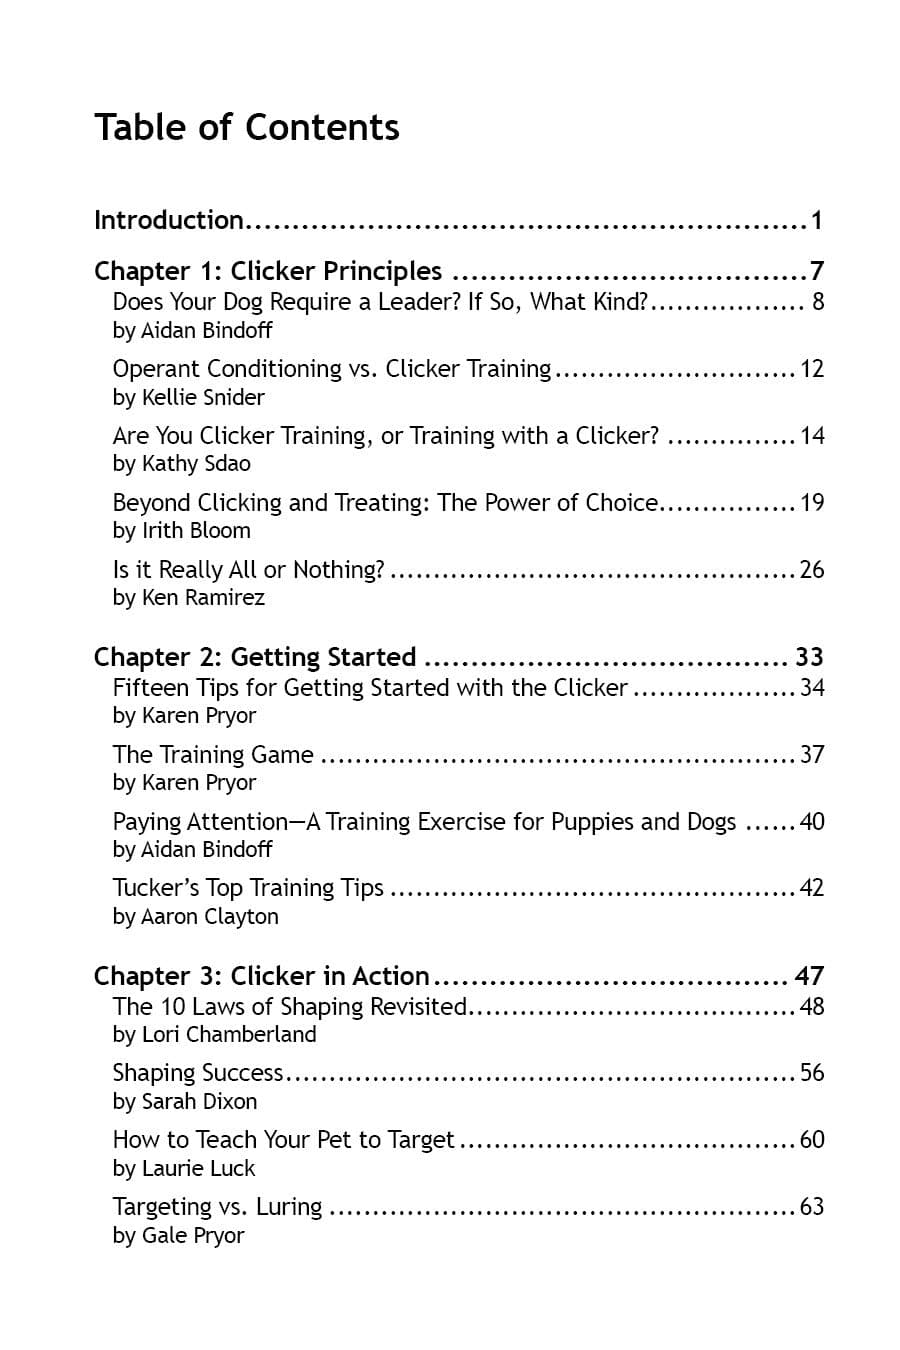 E-BOOK Better Together: The Collected Wisdom of Modern Dog Trainers Edited by Ken Ramirez